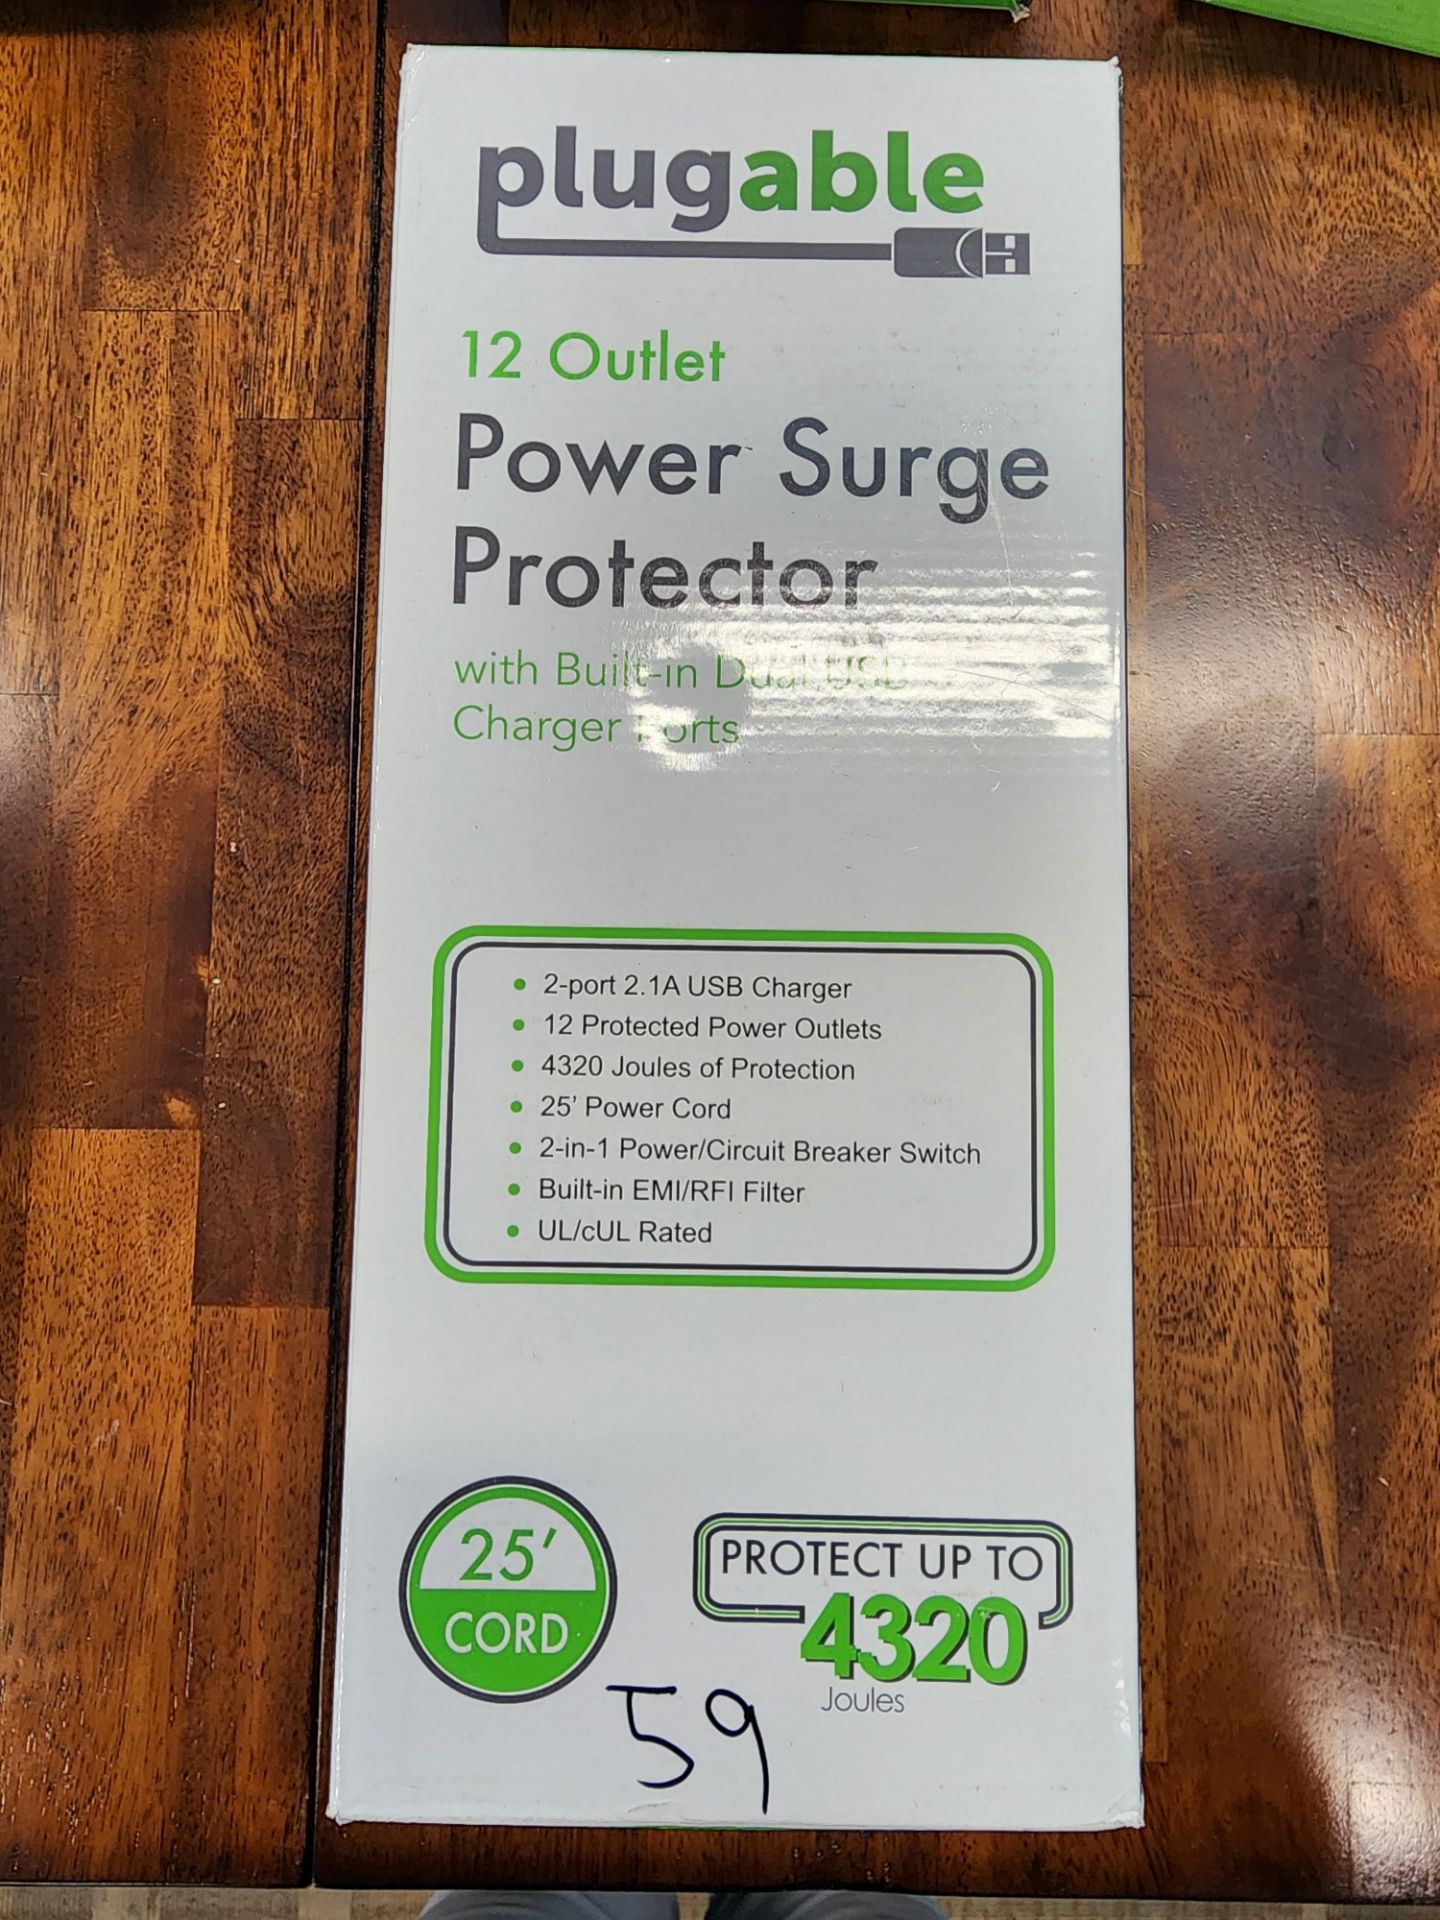 Lot of (6) Plugable 12-Outlet Power Surge Protectors w/Dual USB Charger Ports & 25' Cord - Image 2 of 4